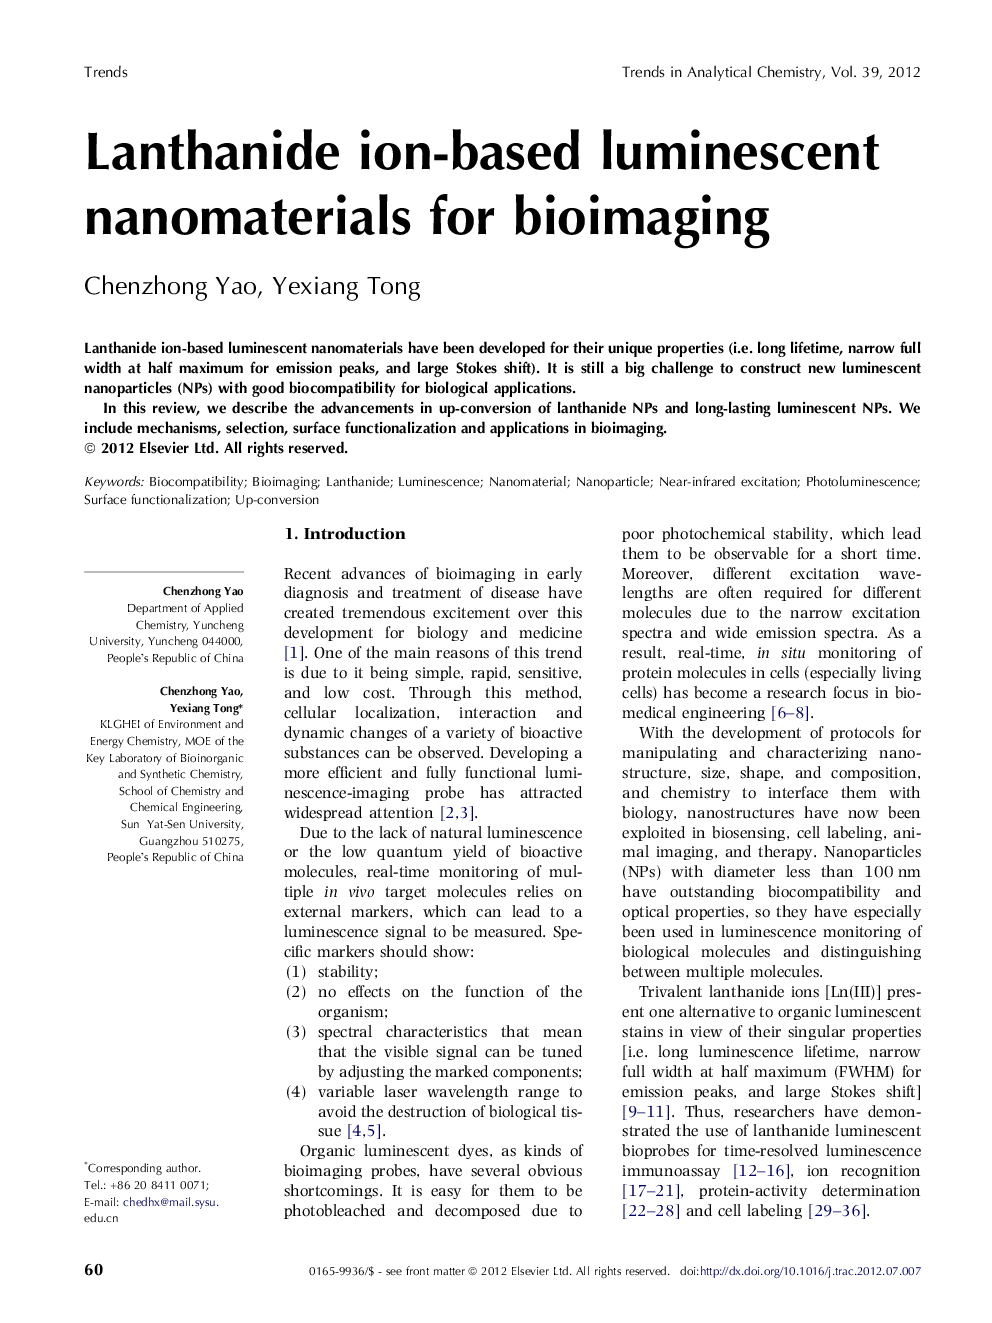 Lanthanide ion-based luminescent nanomaterials for bioimaging